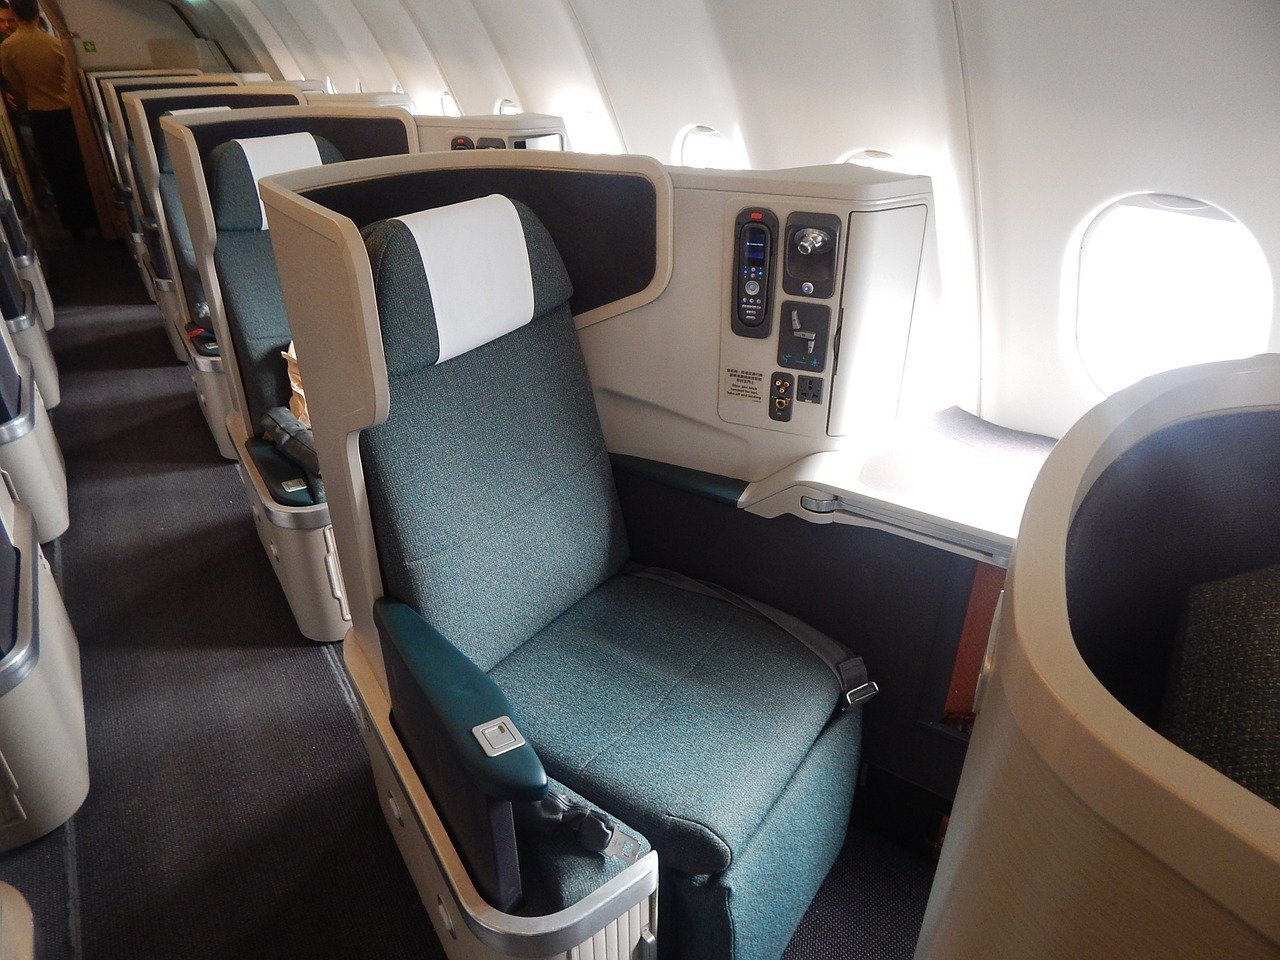 How to get a first class travel upgrade